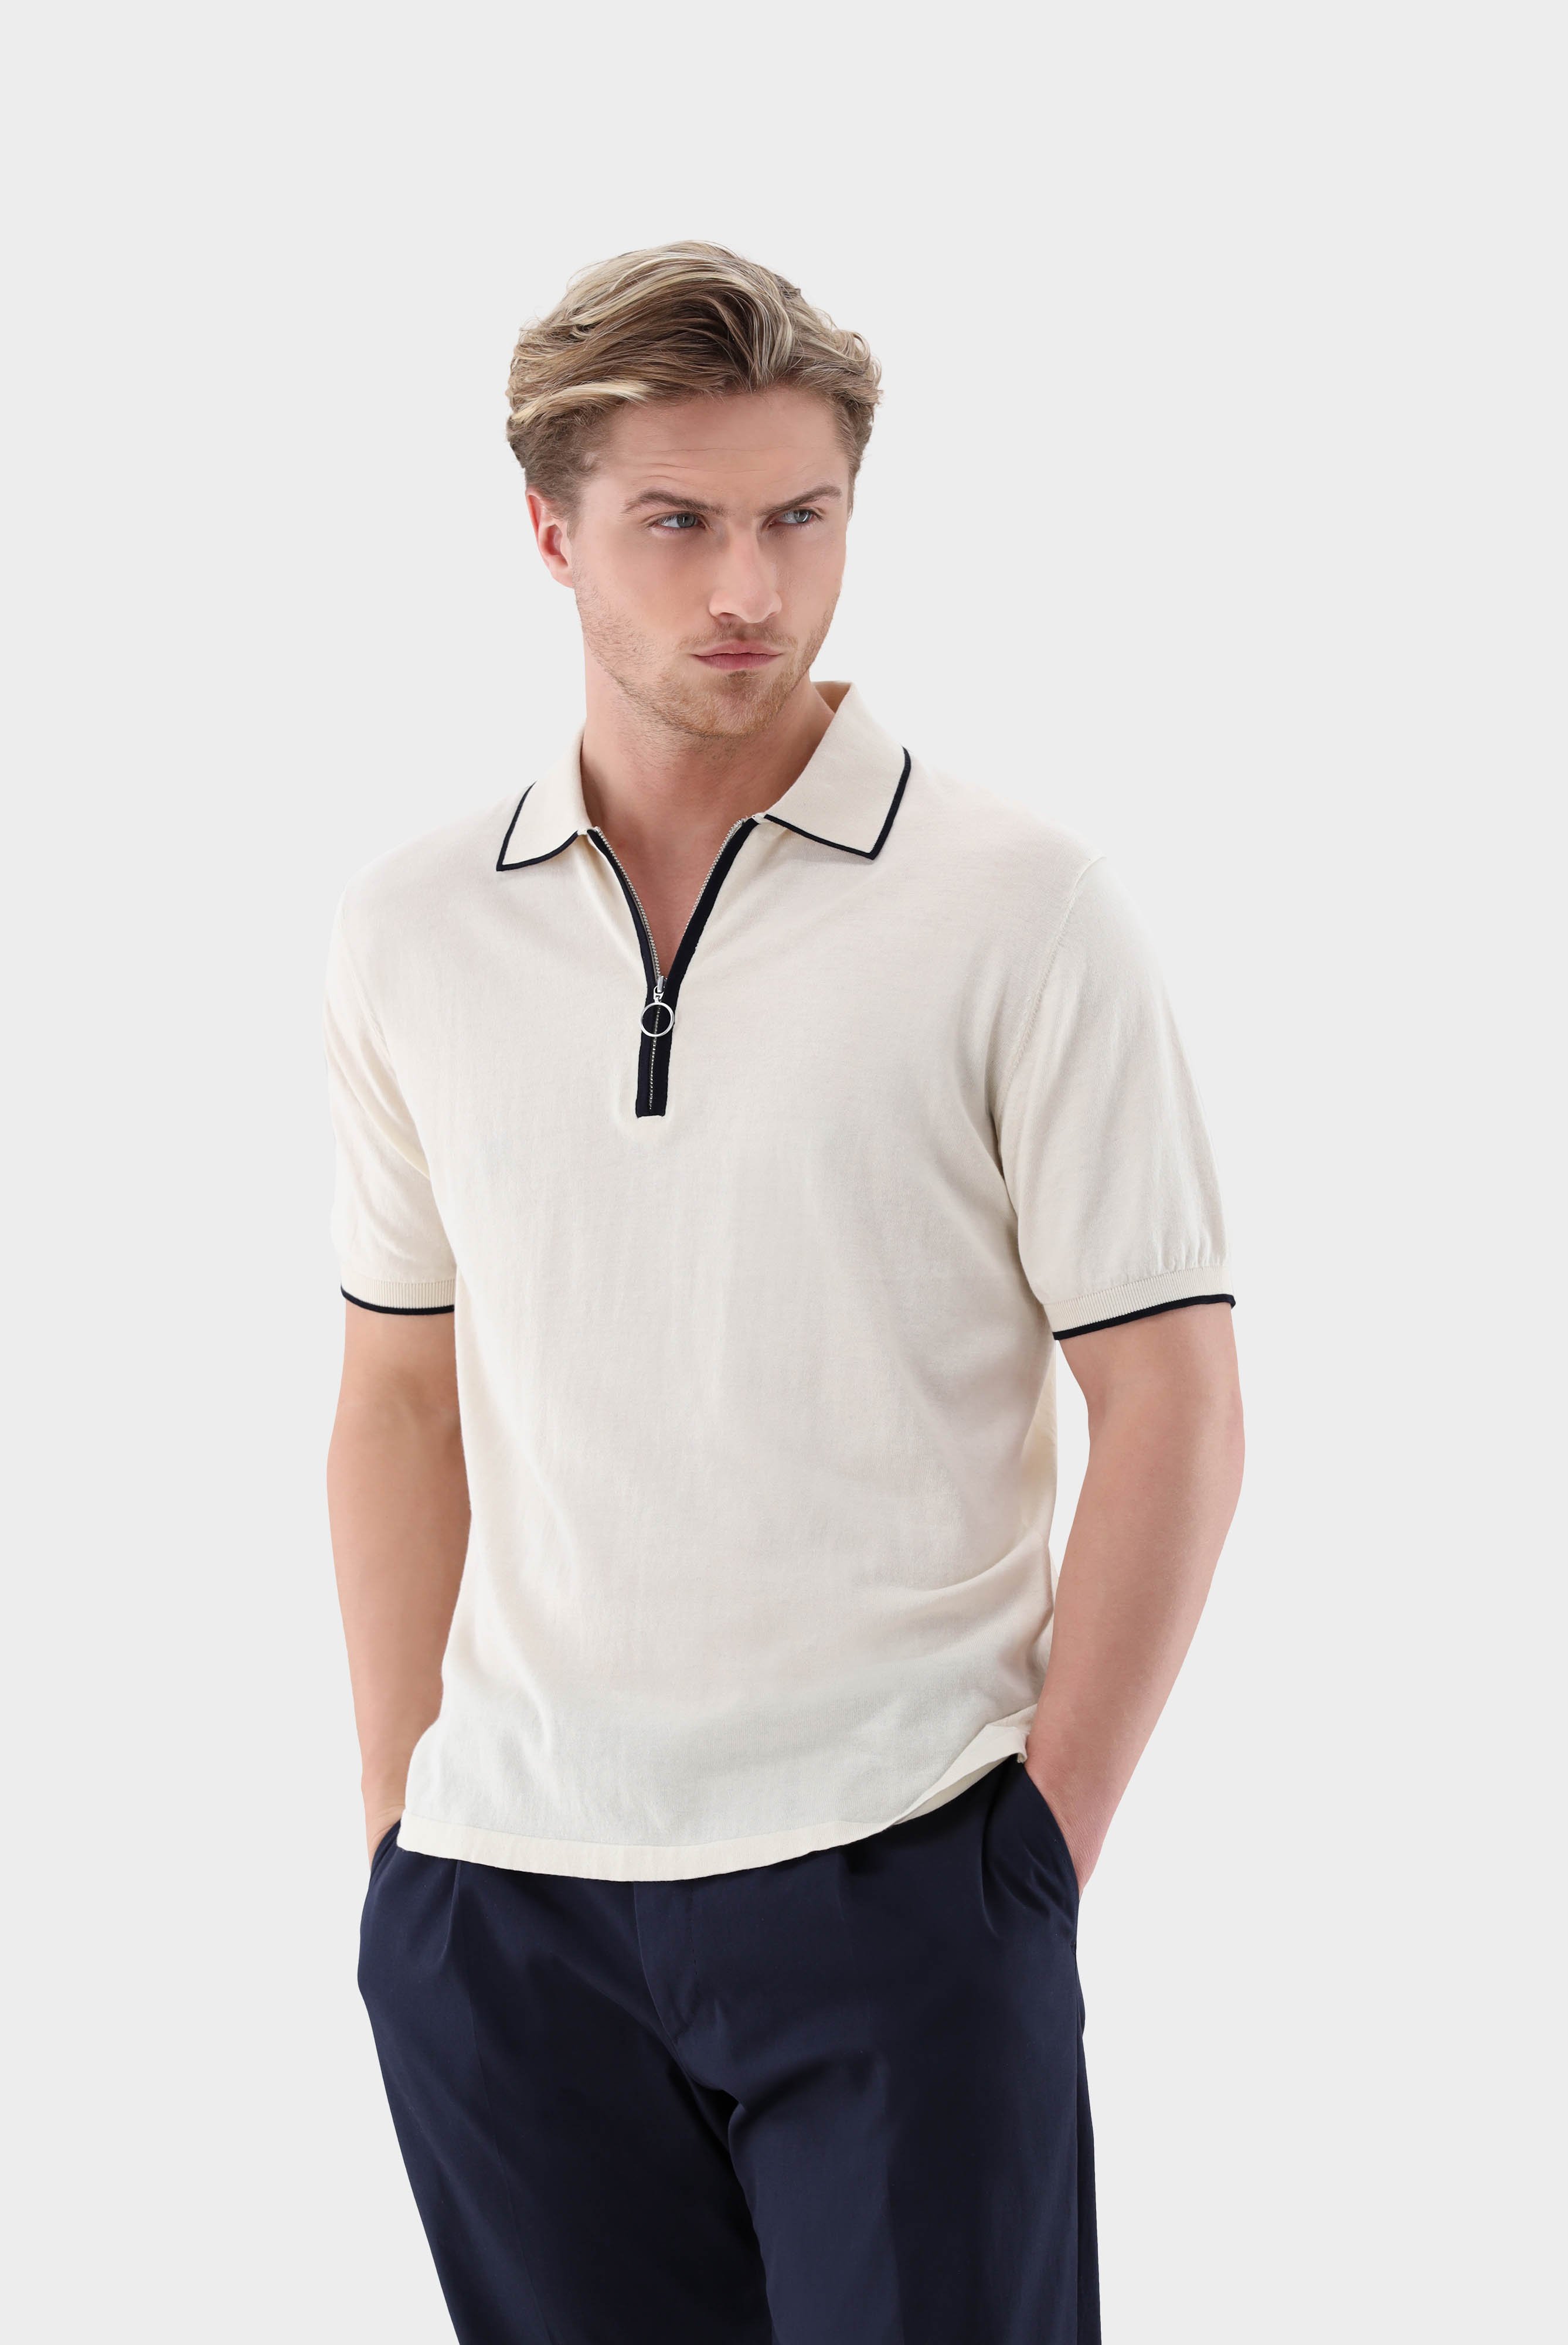 Poloshirts+Zip Knit-Polo in Air Cotton+82.8647.S7.S00174.120.M